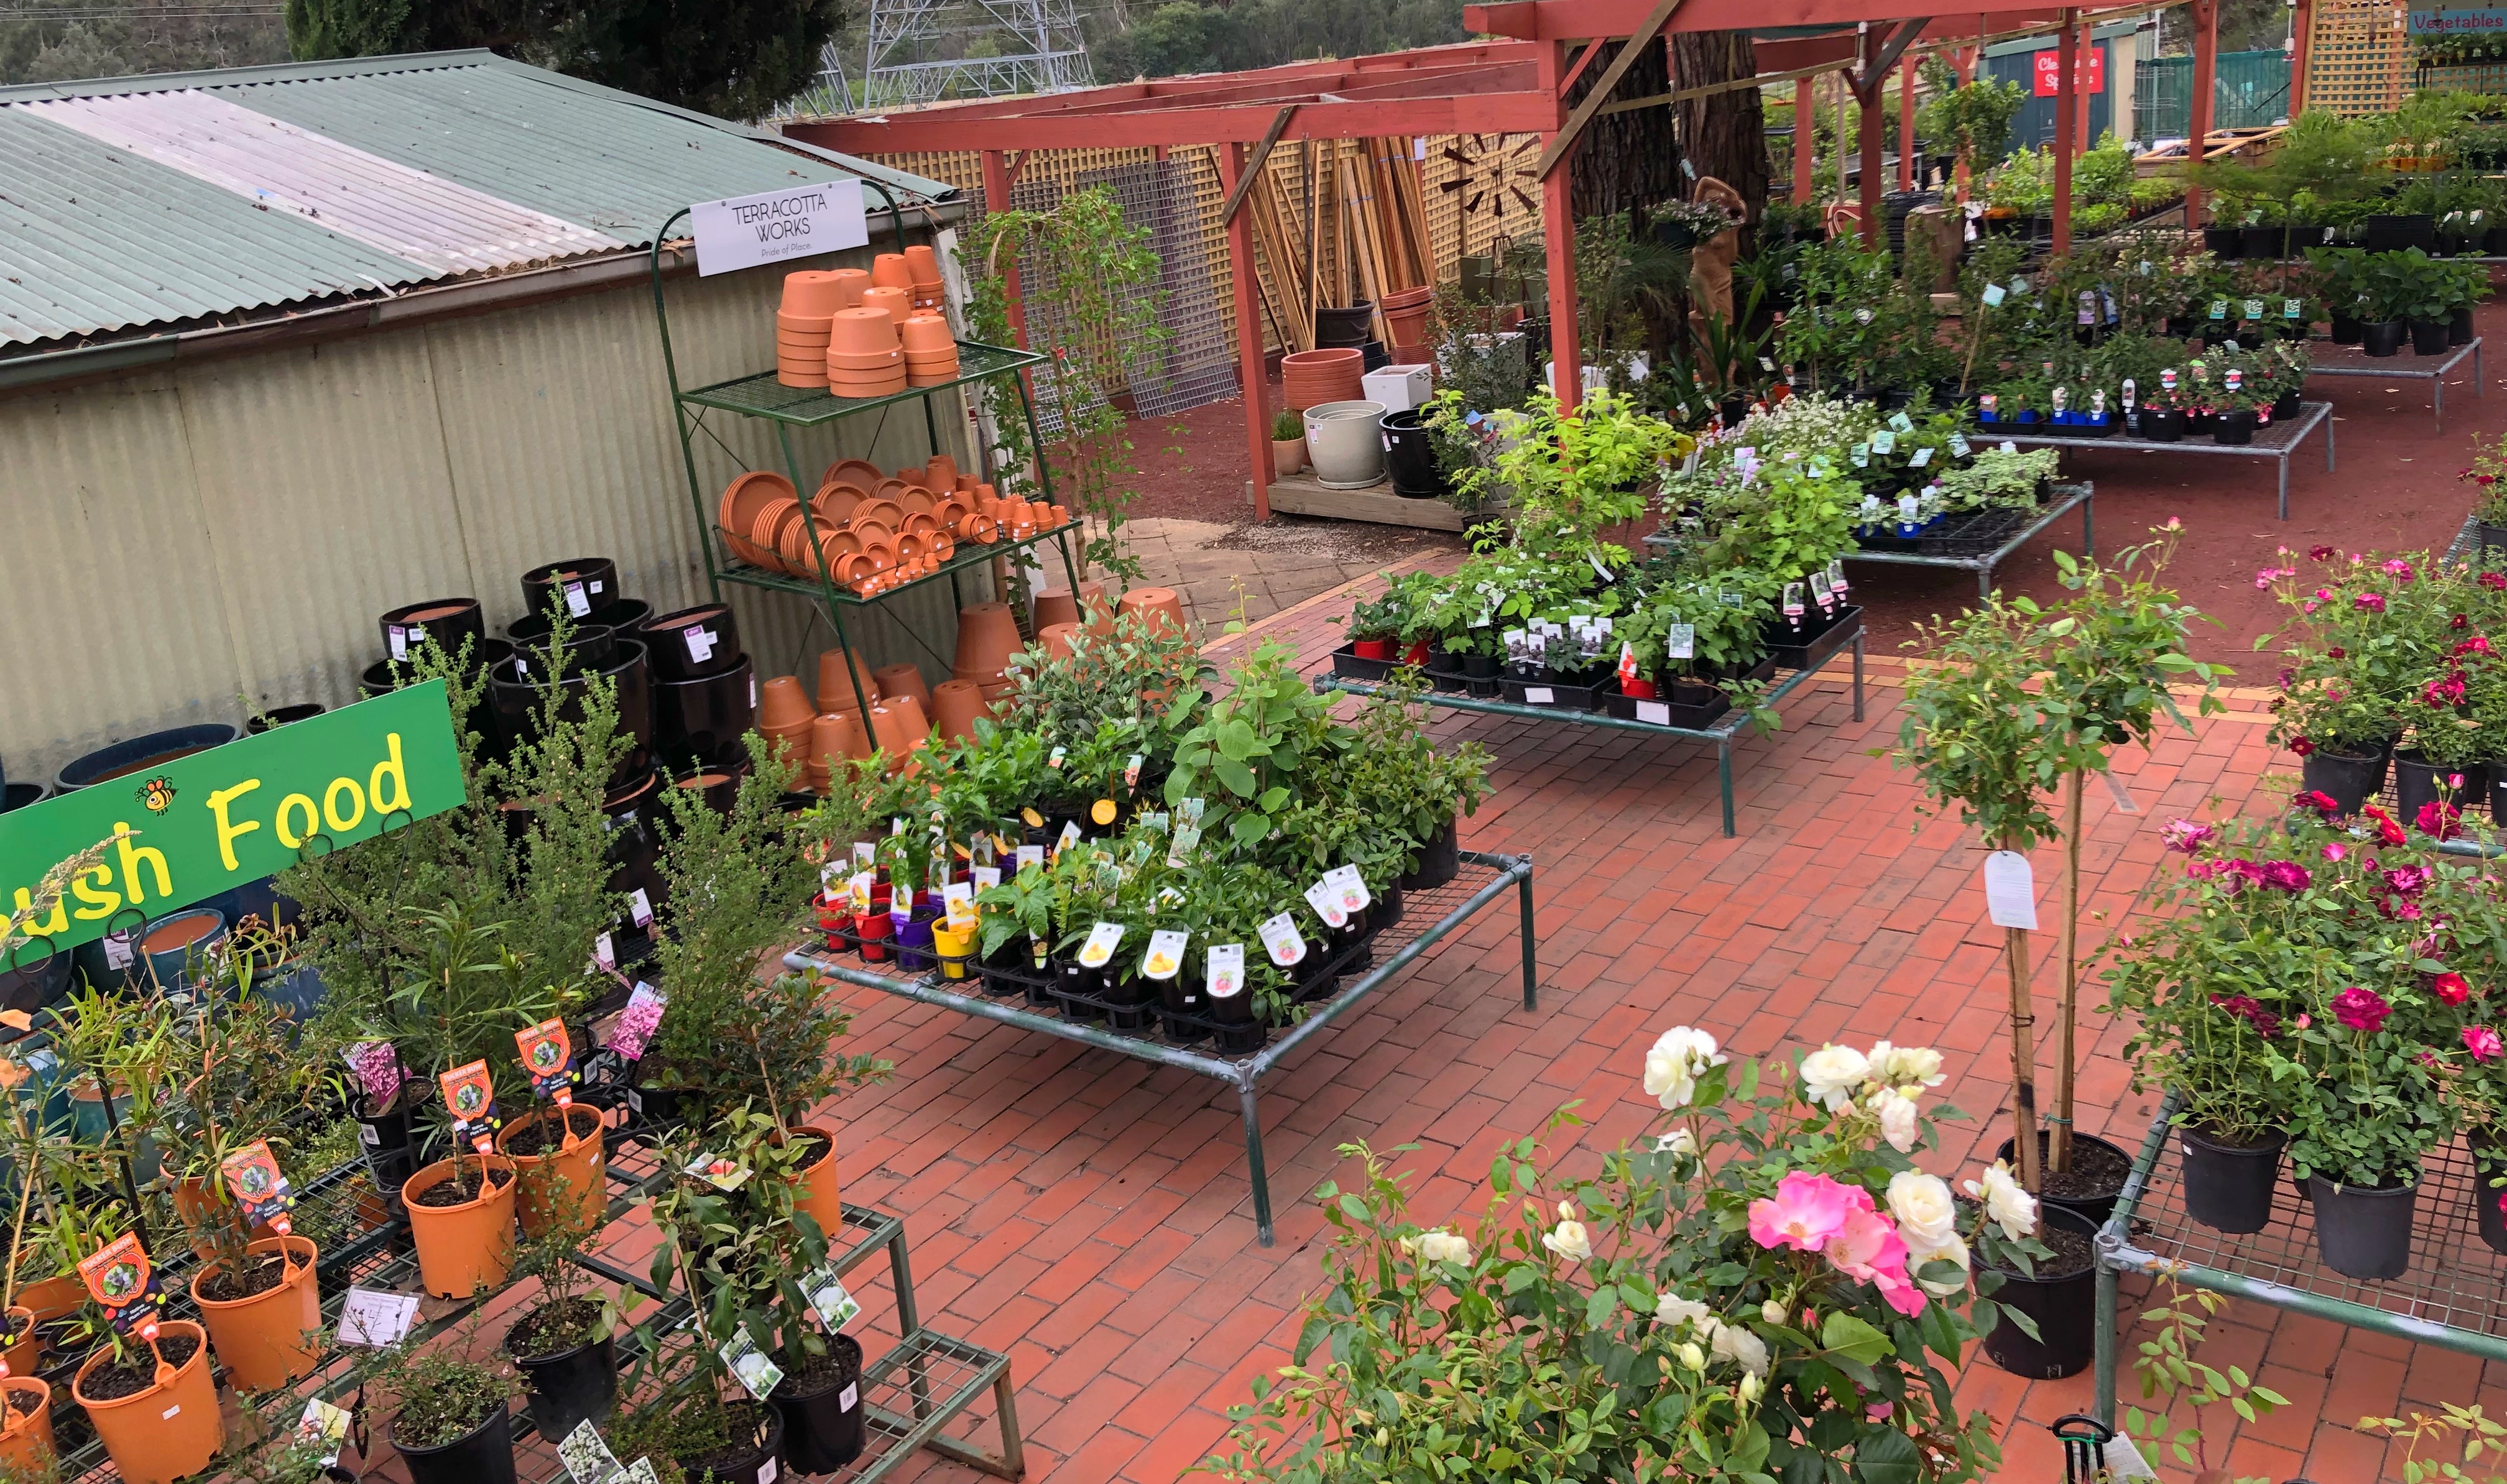 Inspiring Gardeners And Local Communities To Contribute To A Healthy Sustainable And Biodiverse Planet A Locally Owned Retail Nursery With A Commitment To Our Community